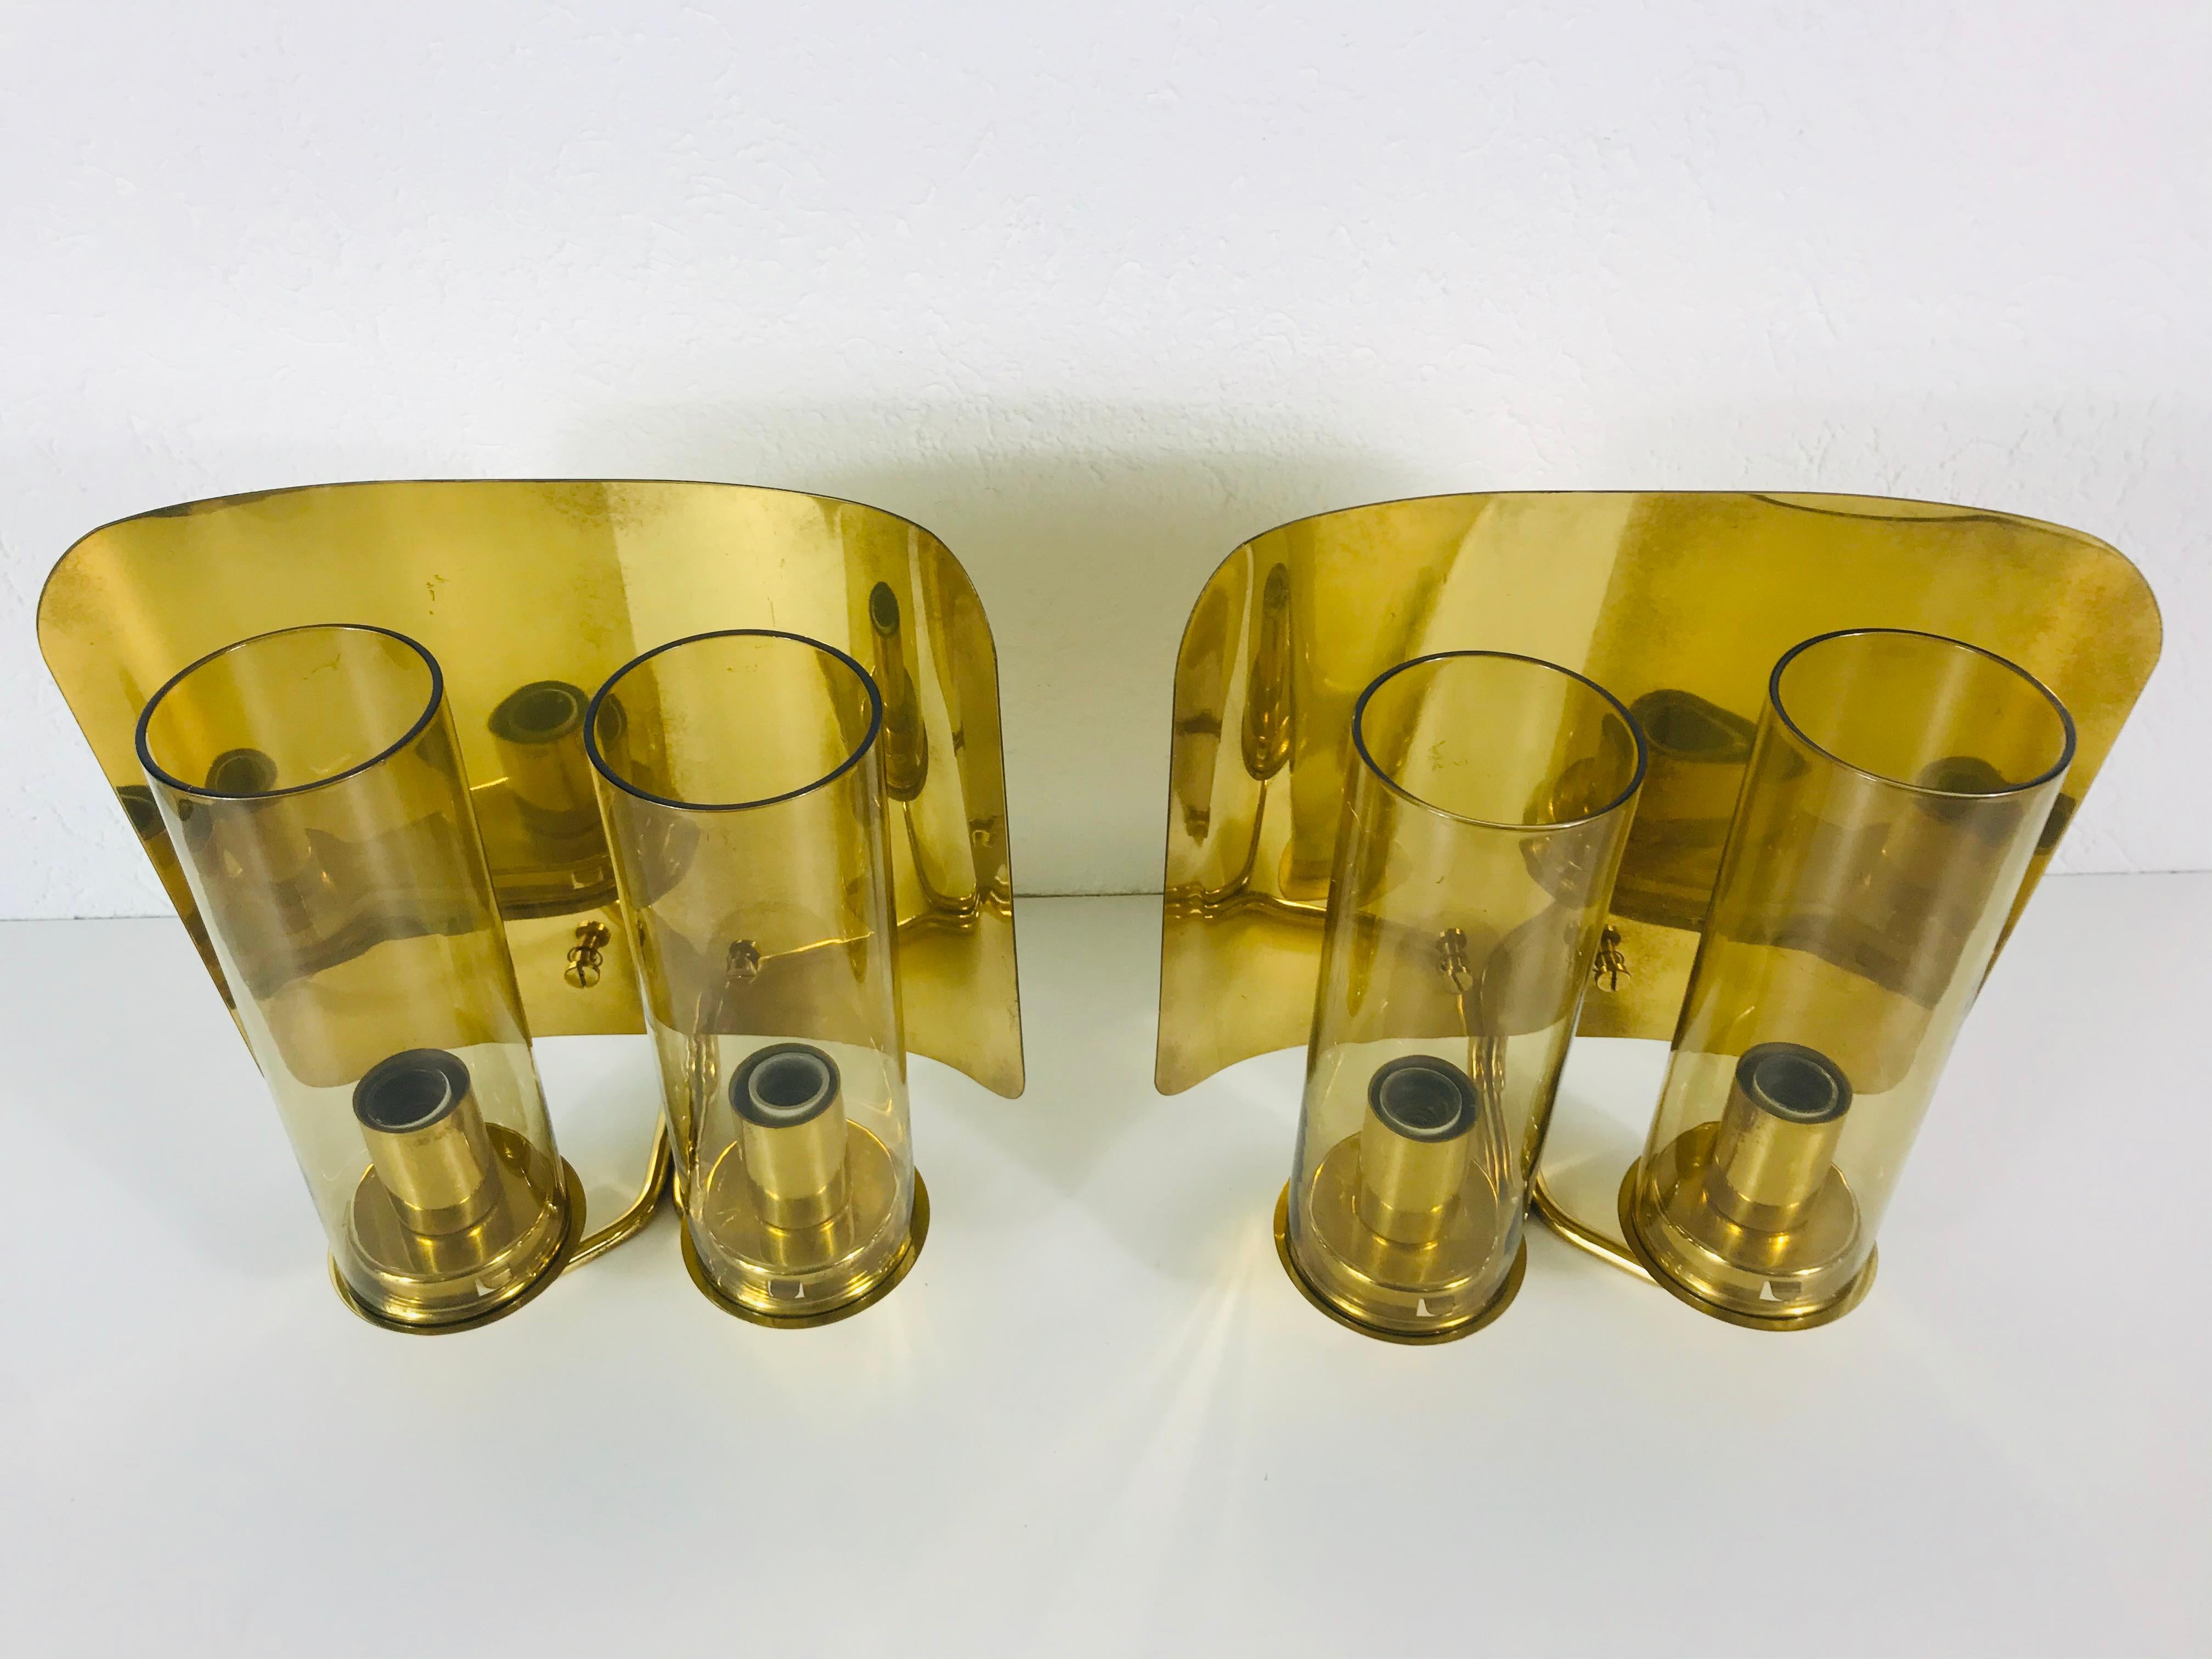 Swedish Pair of Mid-Century Modern Brass Sconces by Hans-Agne Jakobsson, Sweden, 1960s